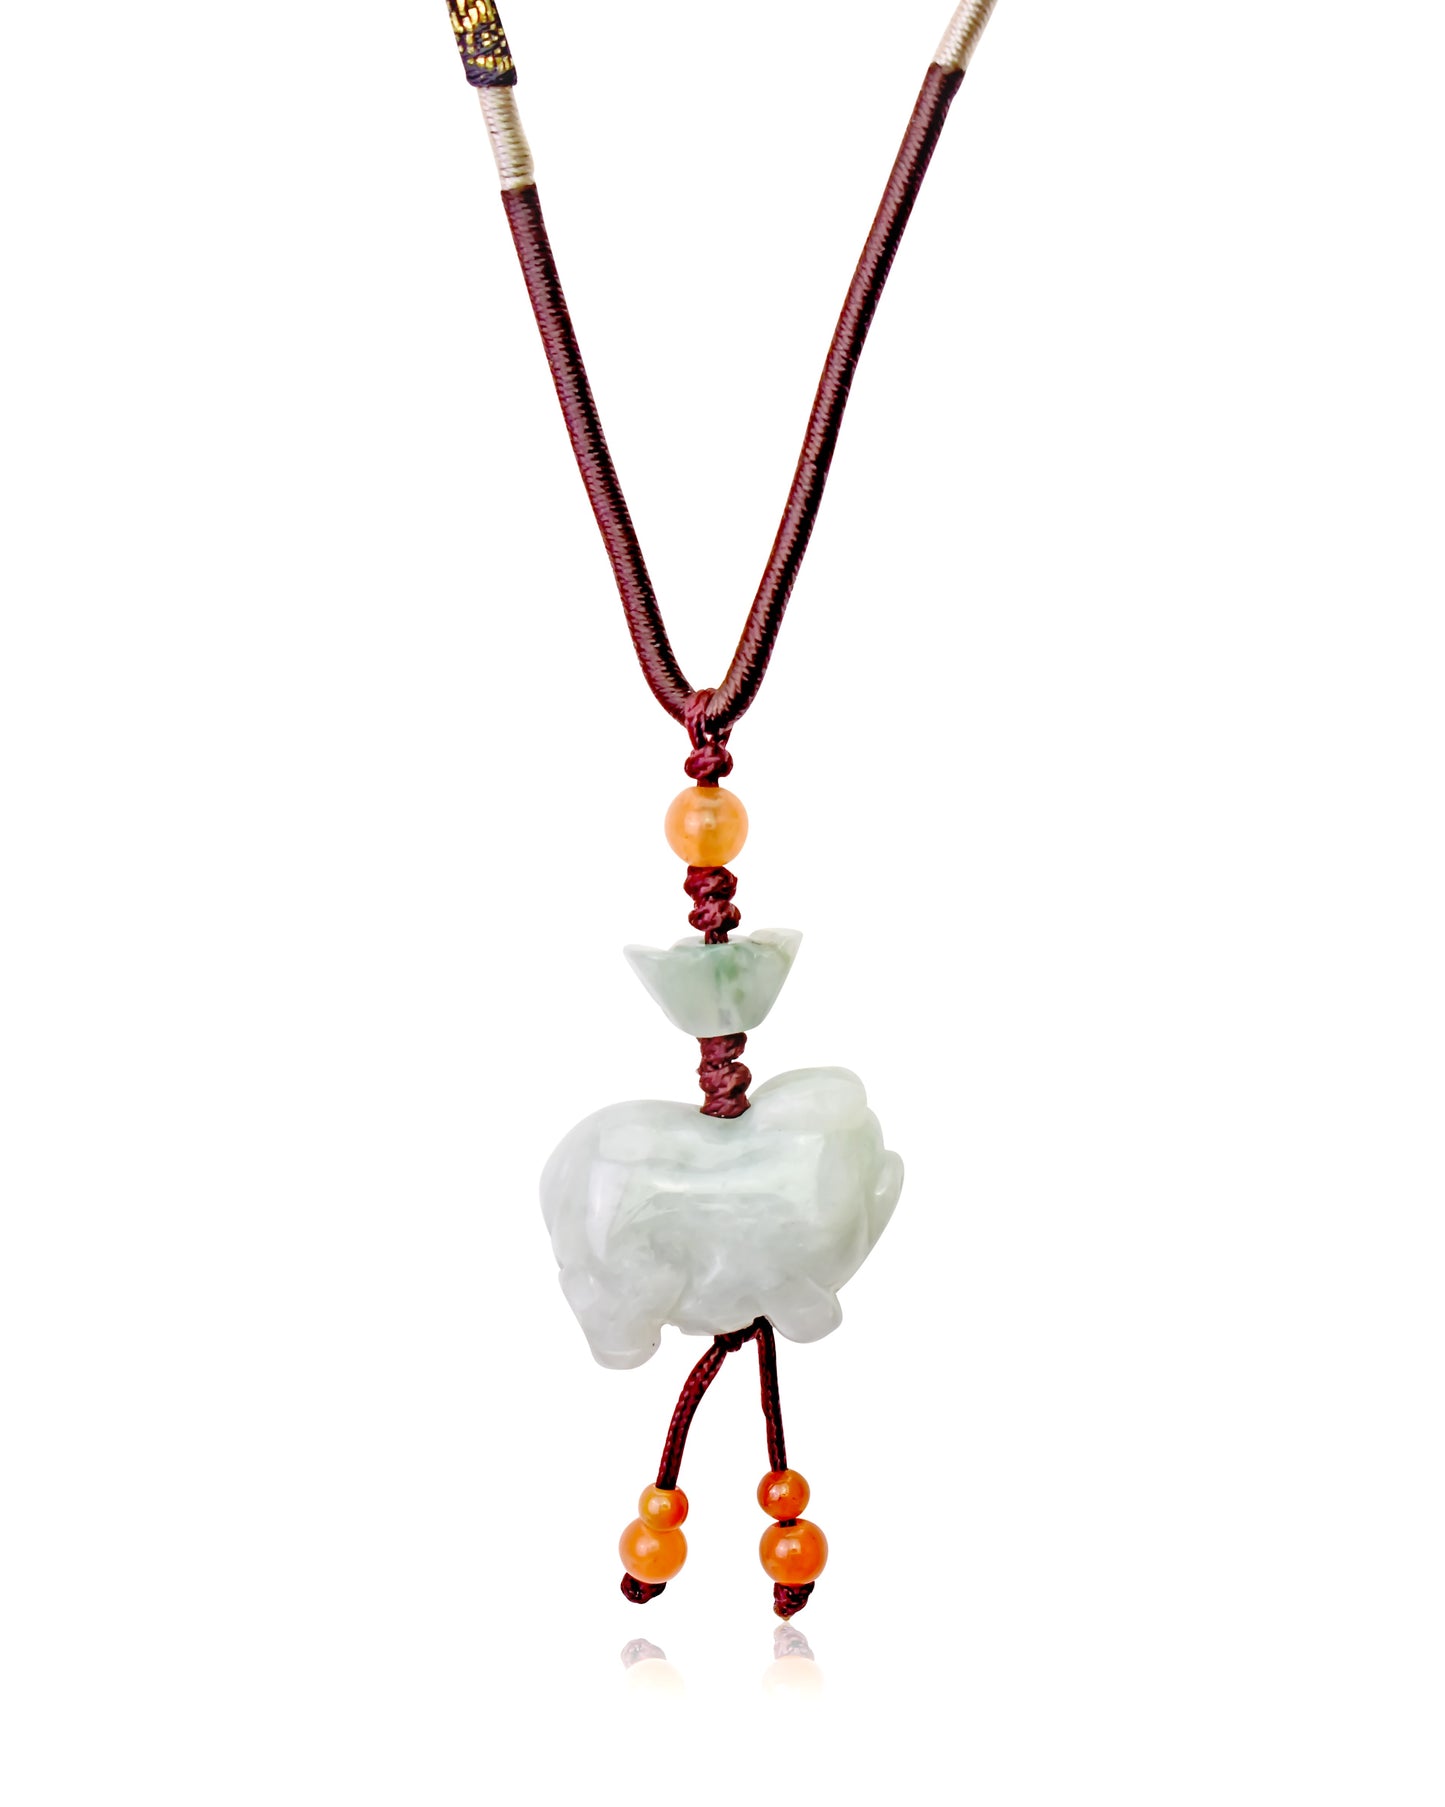 Shine with this Boar Chinese Zodiac Handmade Jade Necklace made with Brown Ribbons